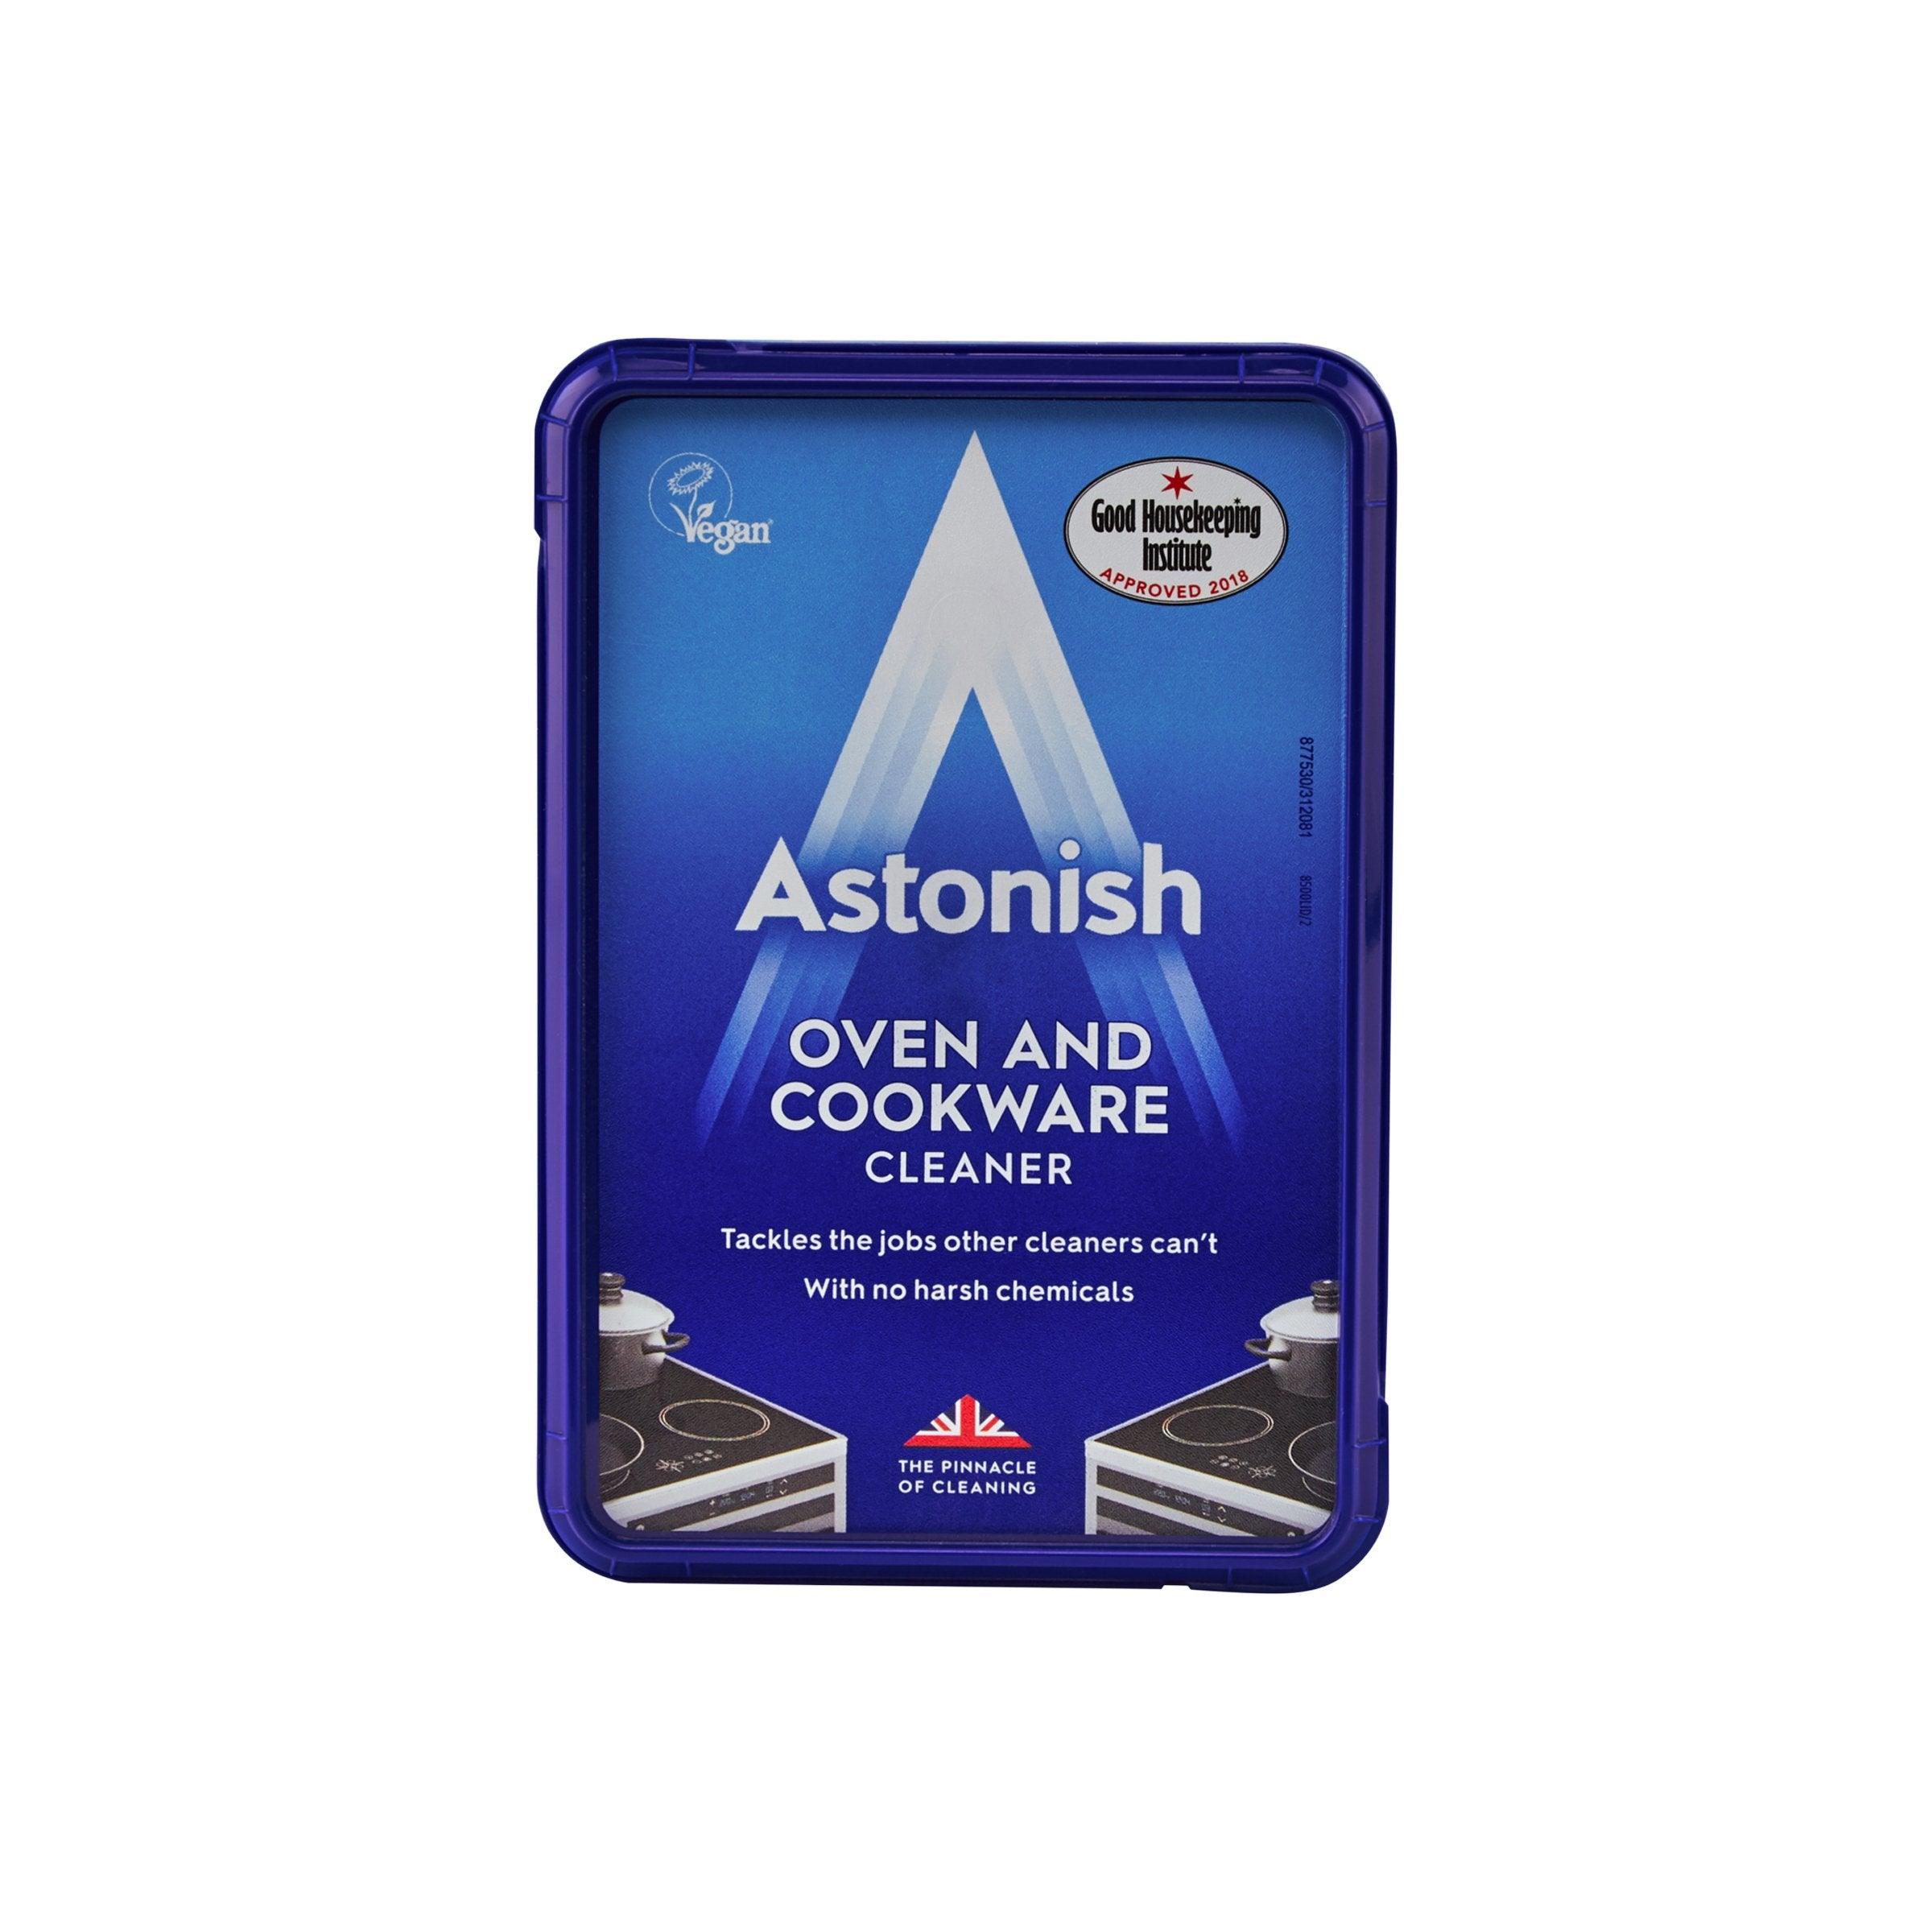 Astonish Original Oven and Cookware Cleaner Paste - 150g - Vending Superstore